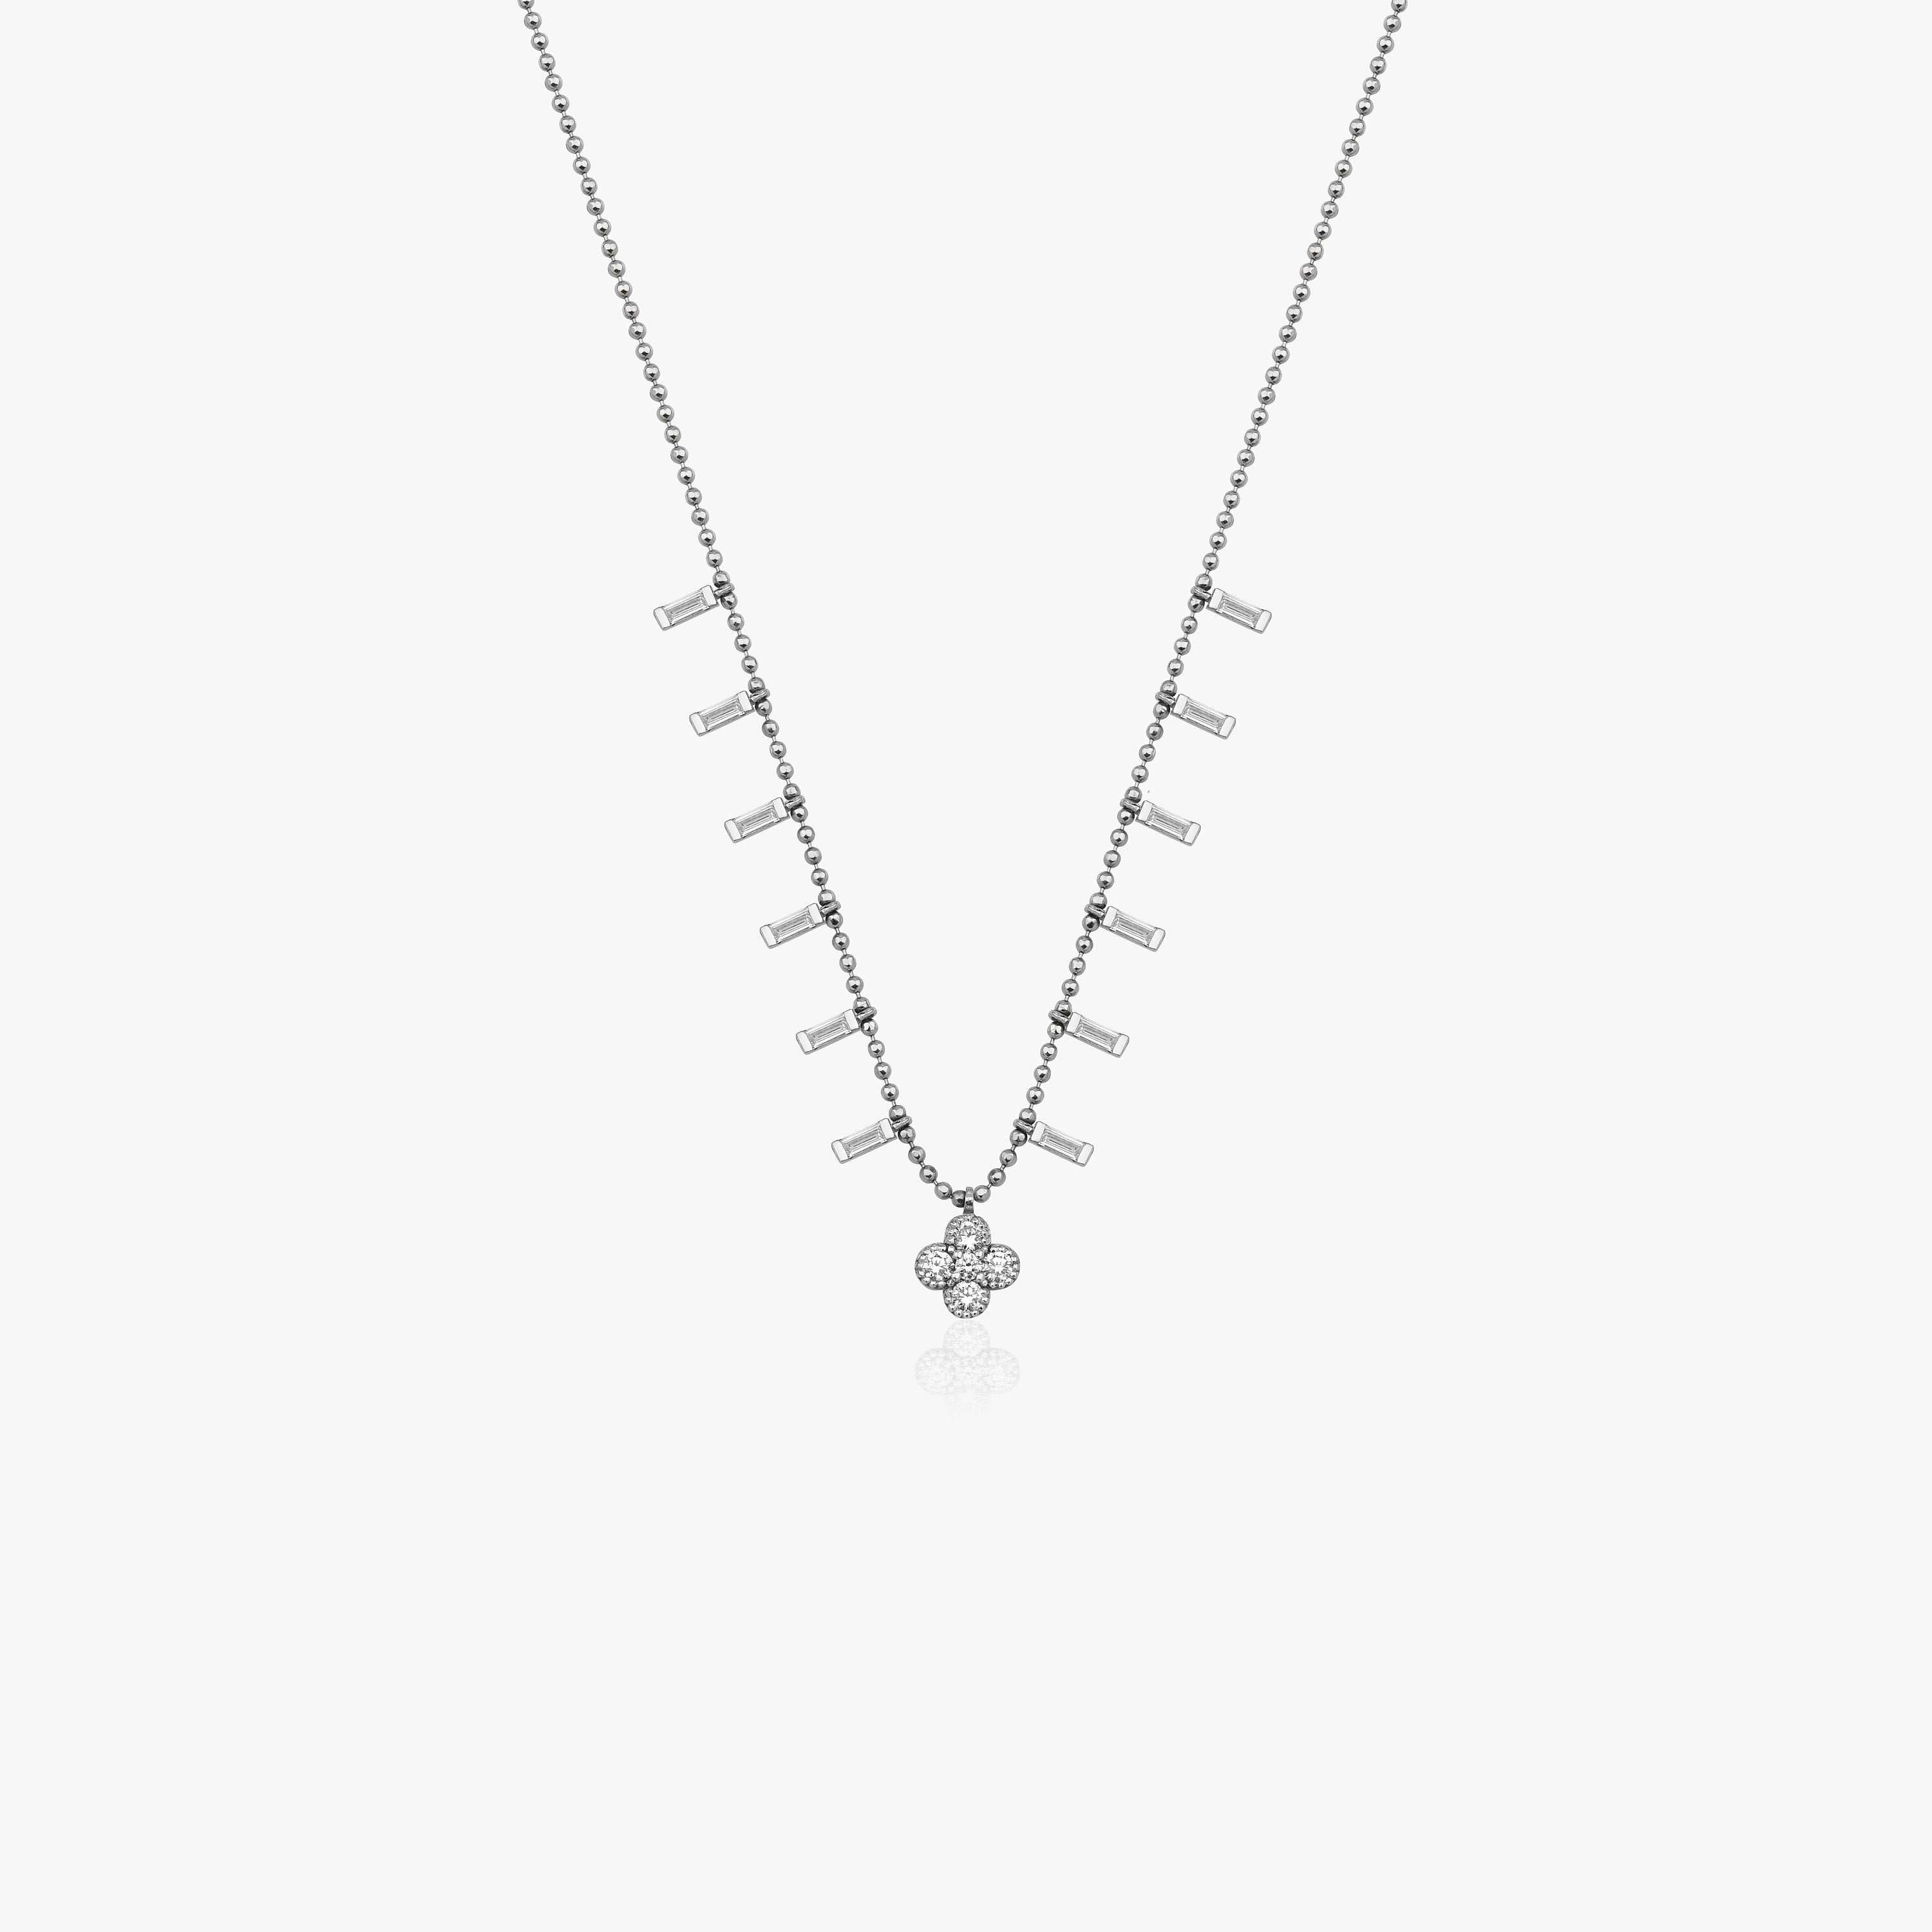 Diamond Clover Necklace With Baguette Cut Diamond Charms in 14K Gold